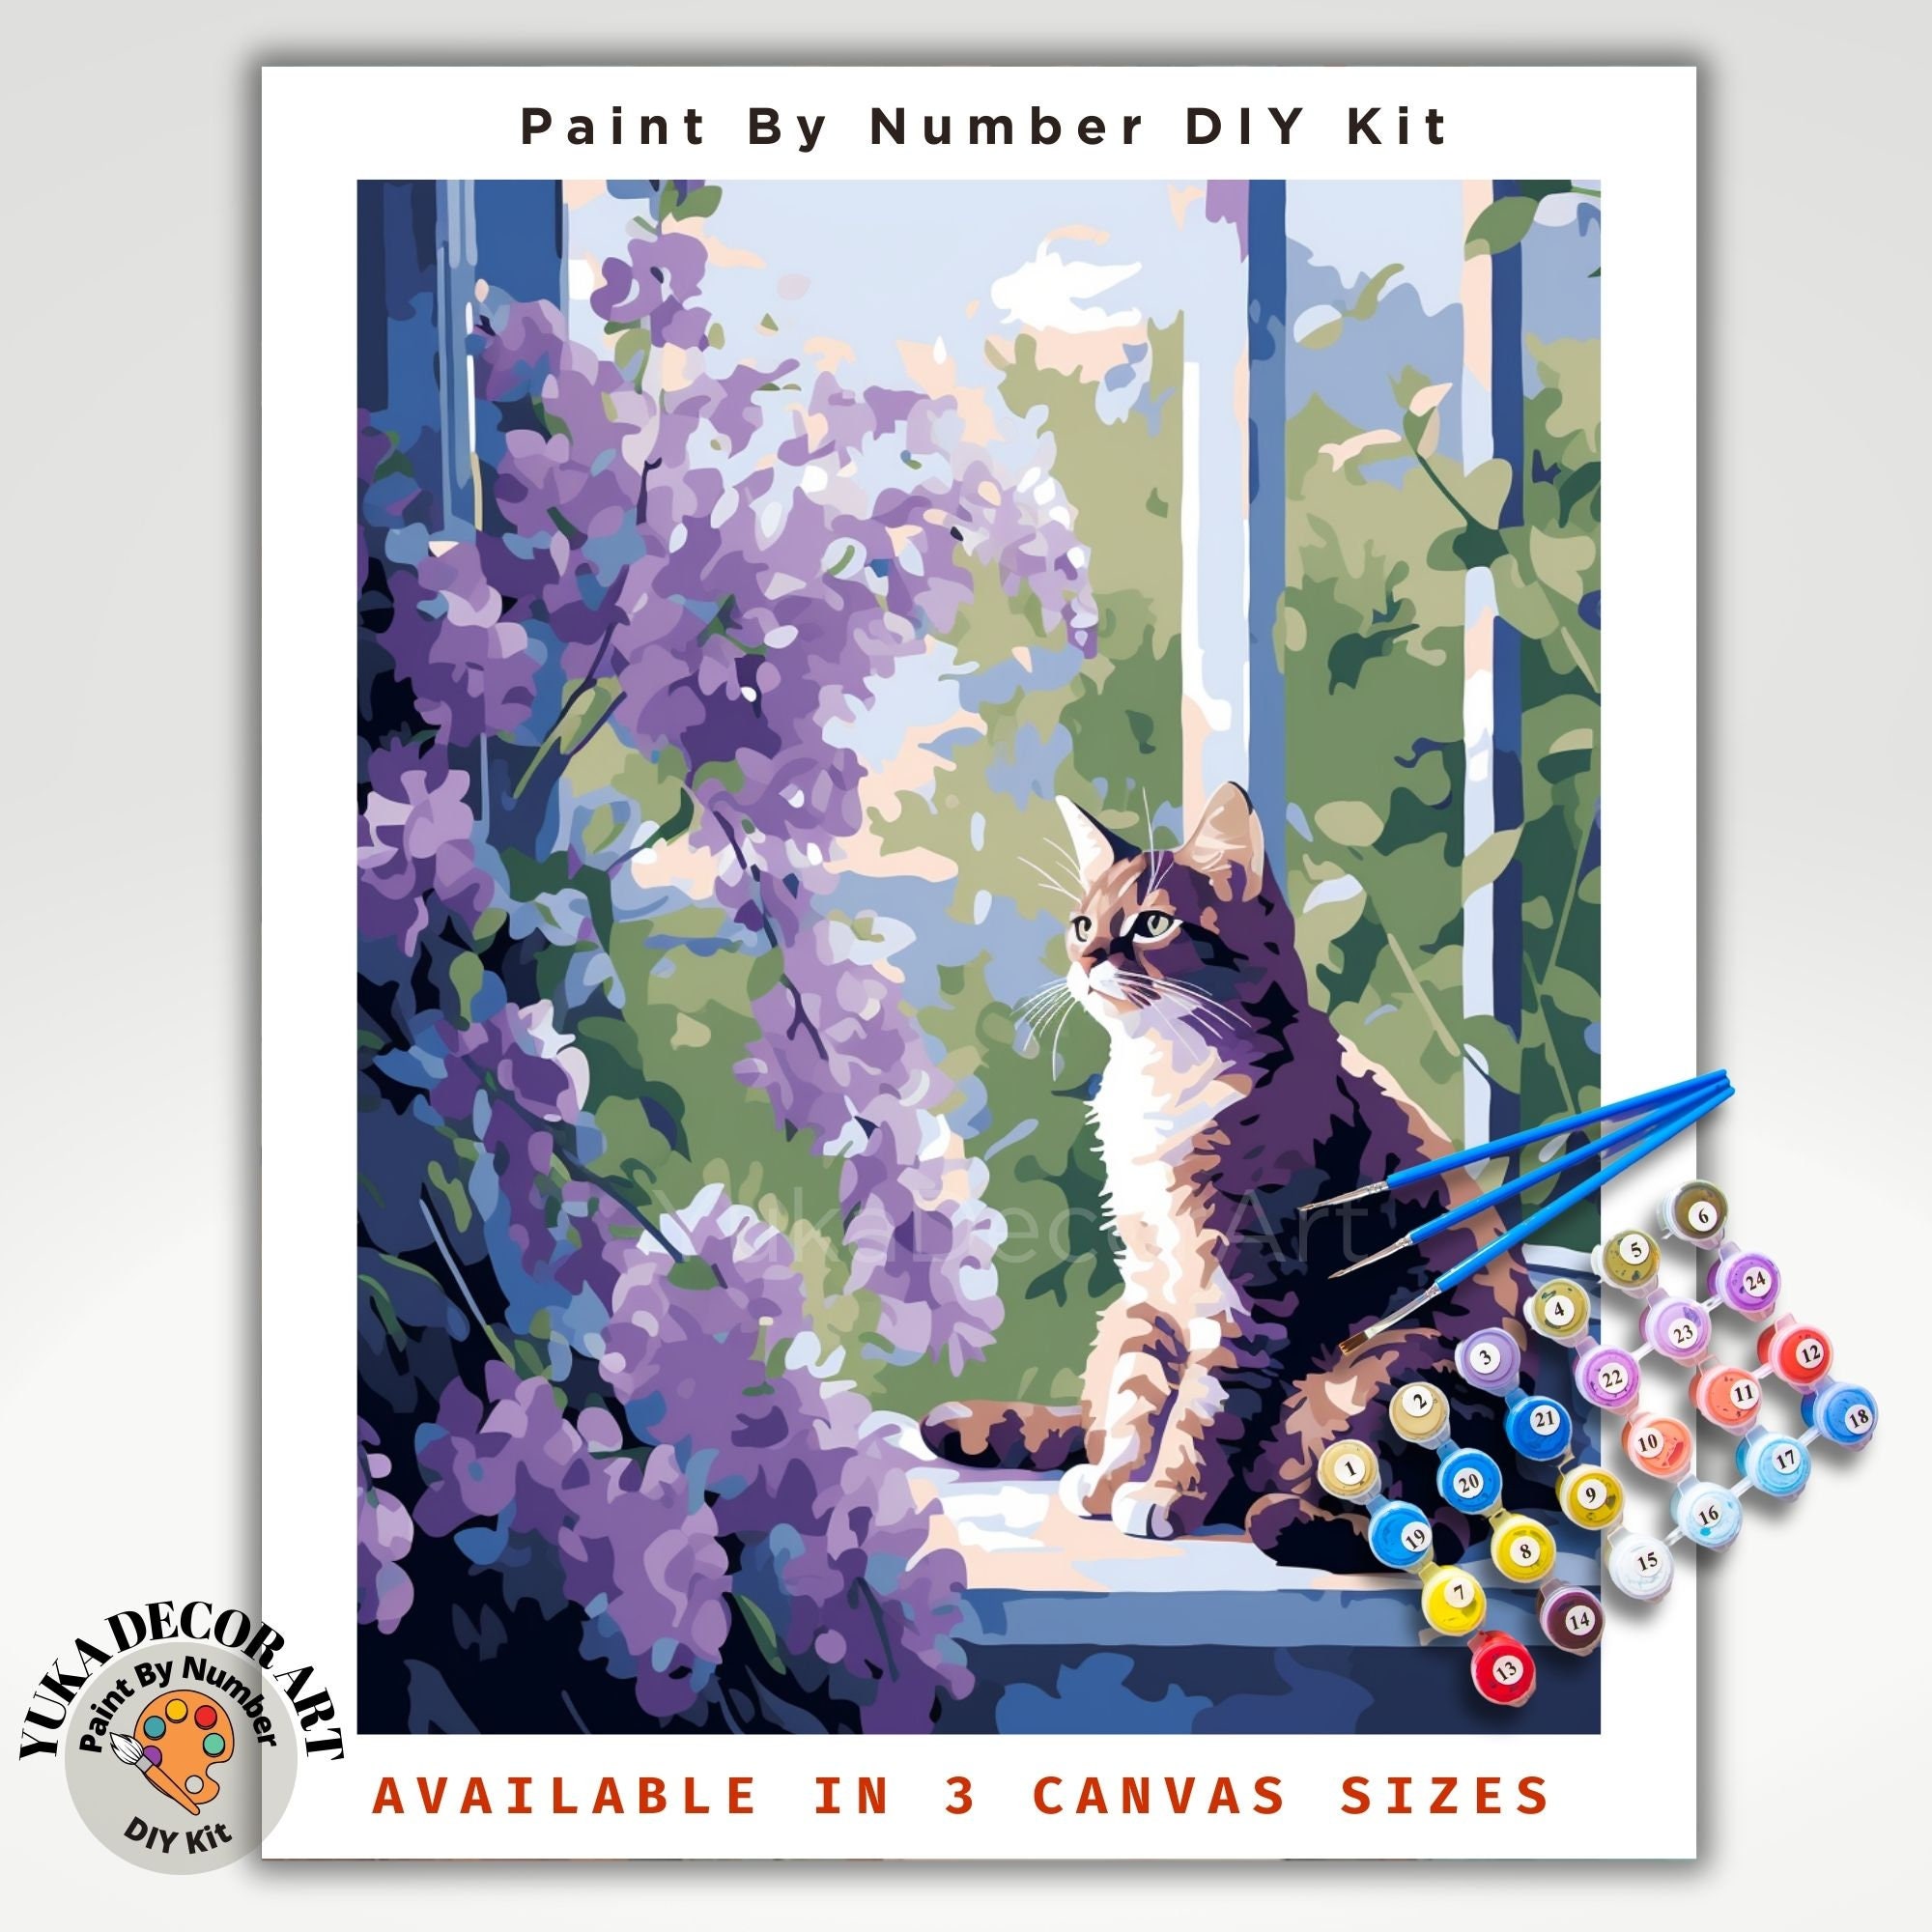 Paint By Numbers Adults Colorful Cat DIY Painting Kit 40x50CM